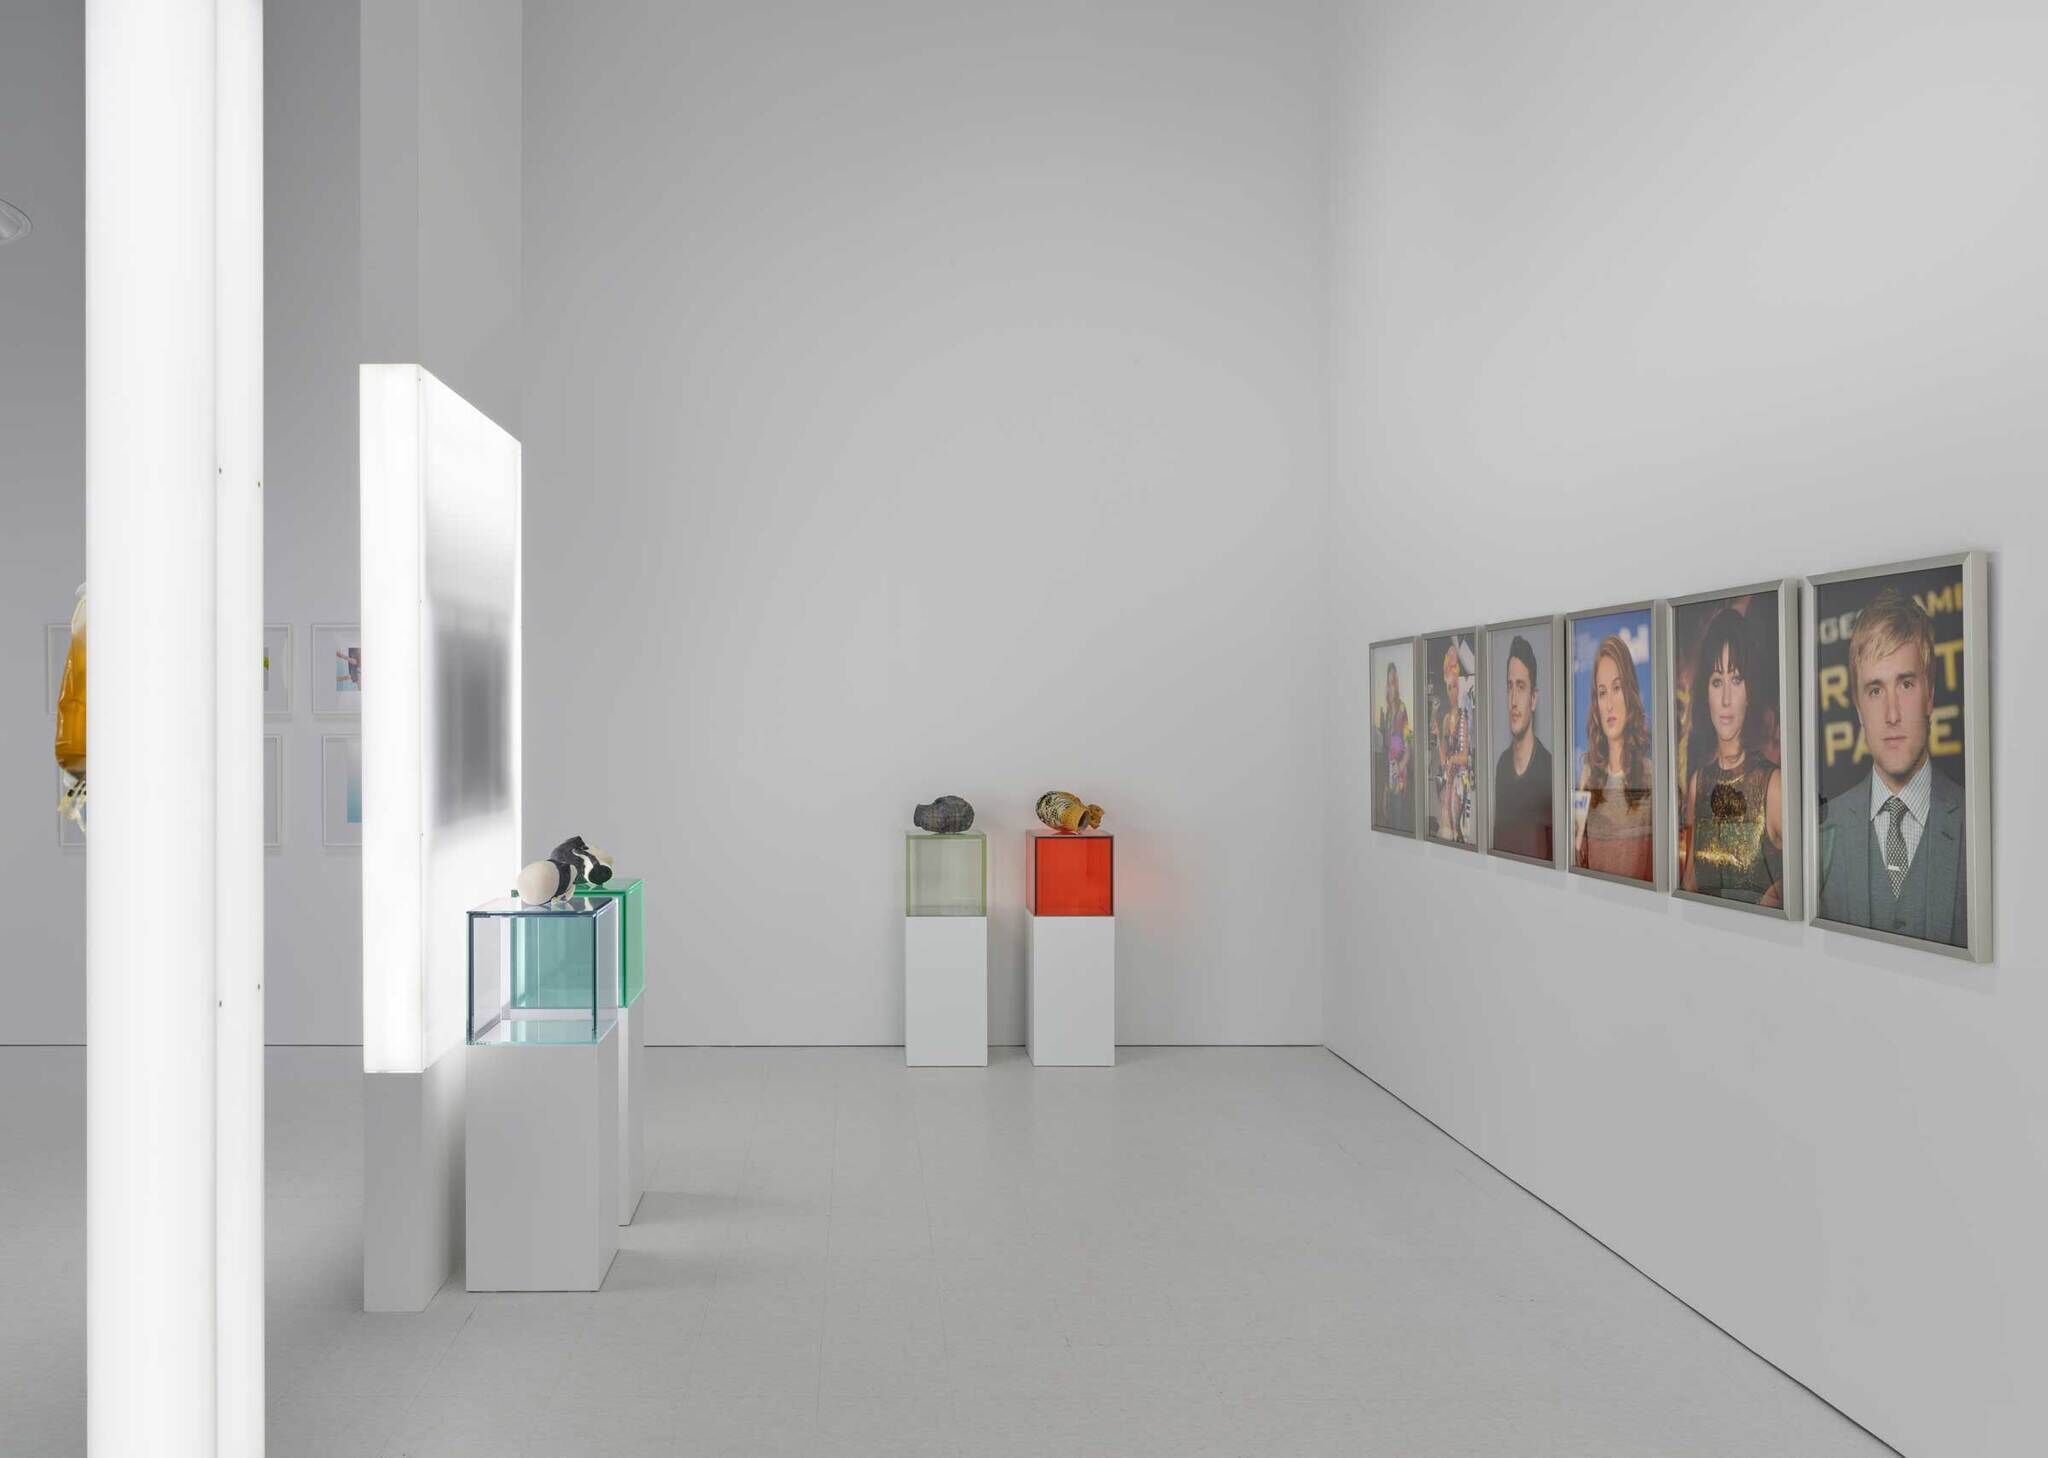 From left to right: two transparent boxes with mannequin heads, two transparent boxes with mannequin heads, and six photograph portraits on the right wall.